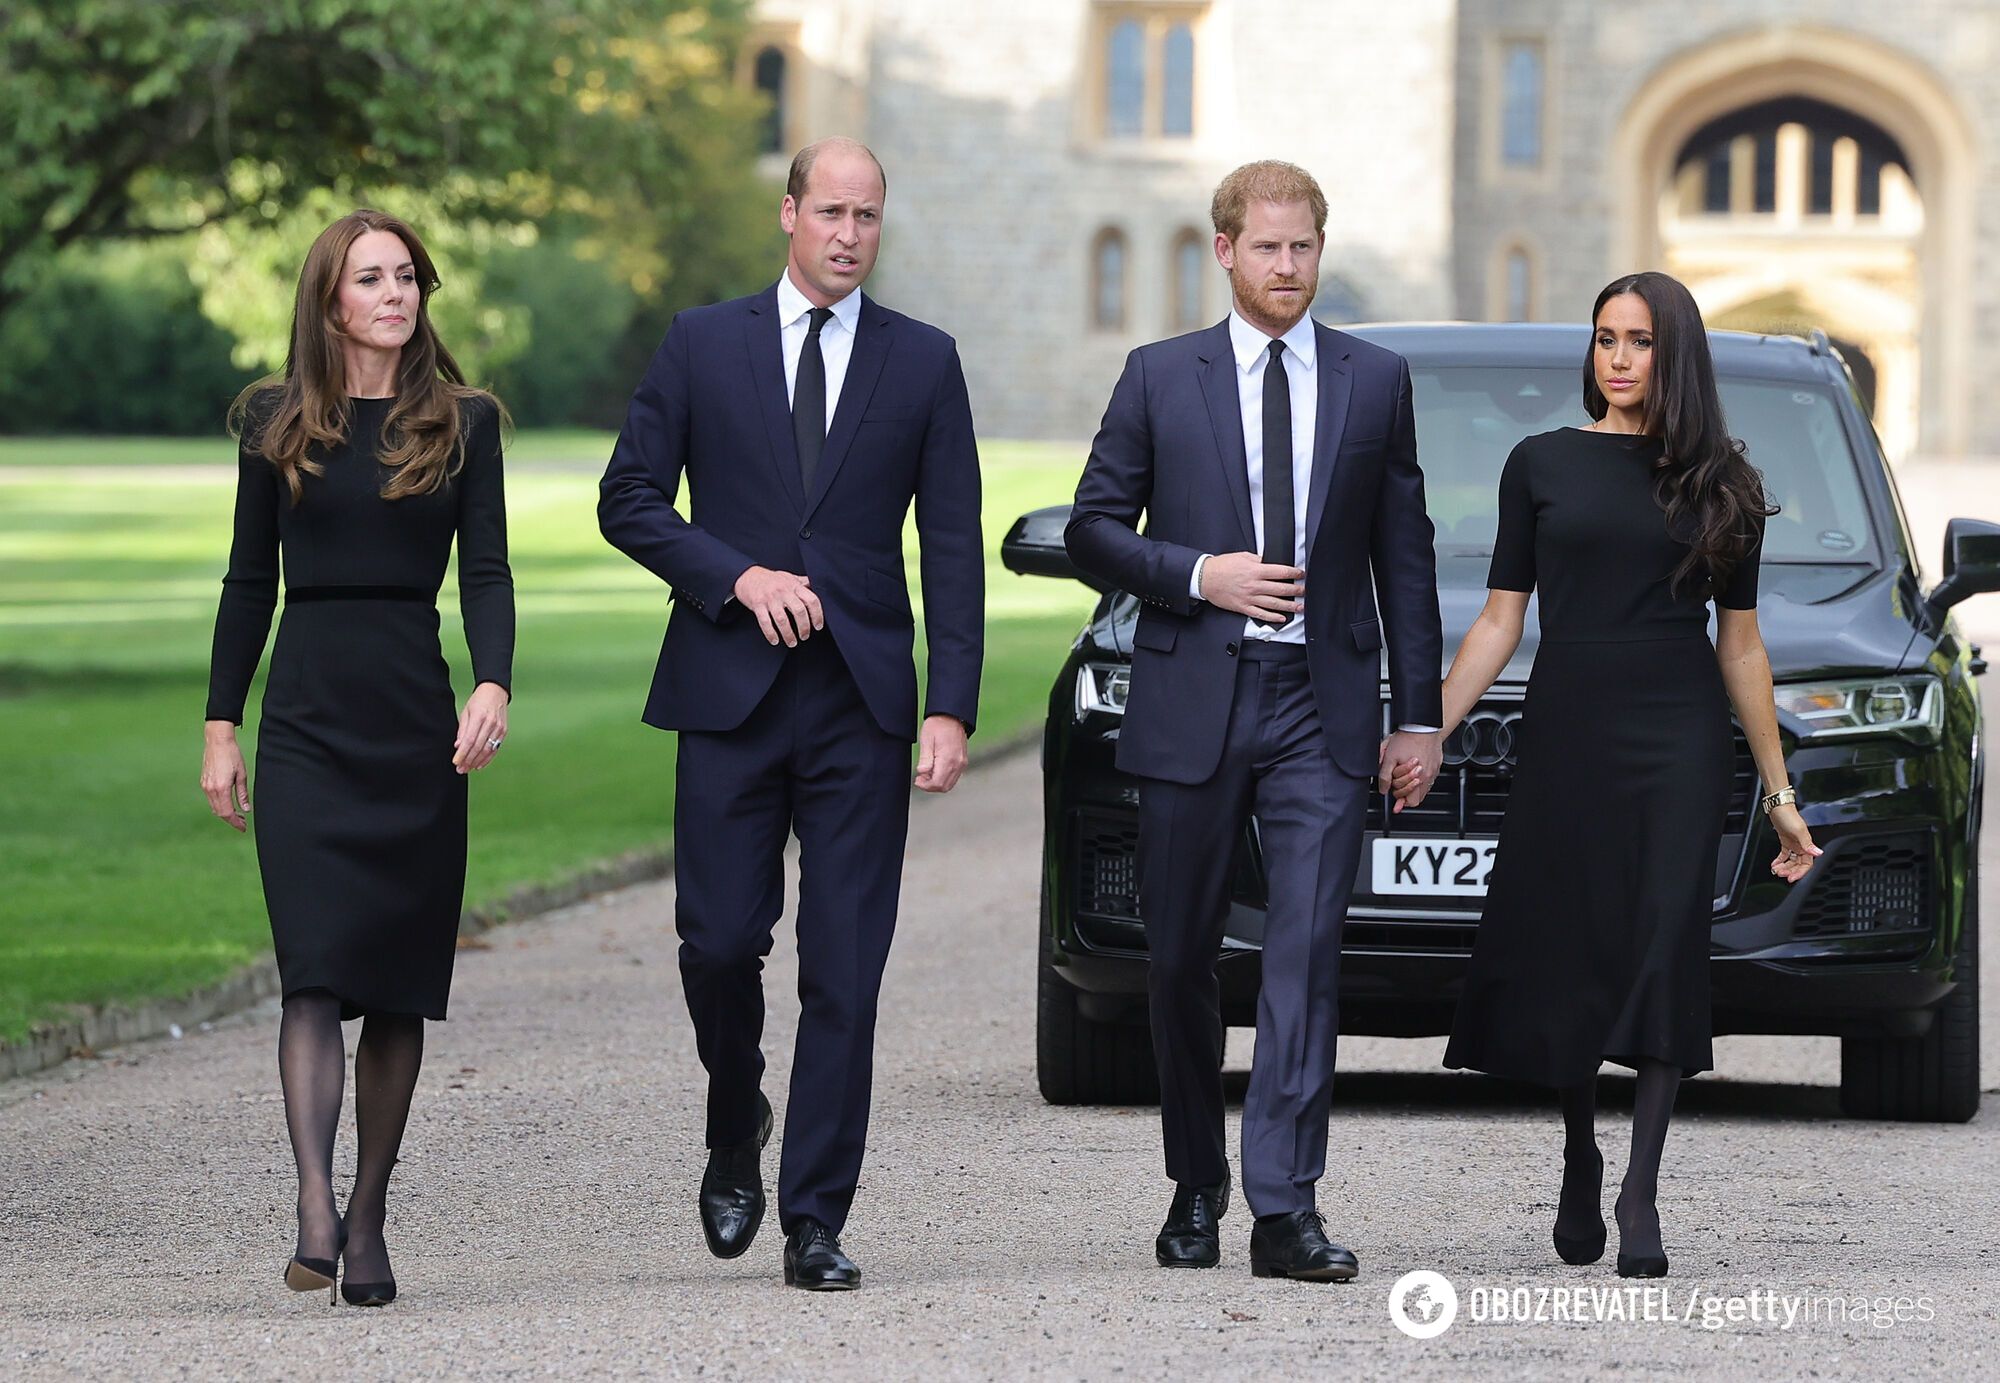 King Charles III, Prince Harry and Meghan Markle, the White House and the UK prime minister react to Kate Middleton's diagnosis